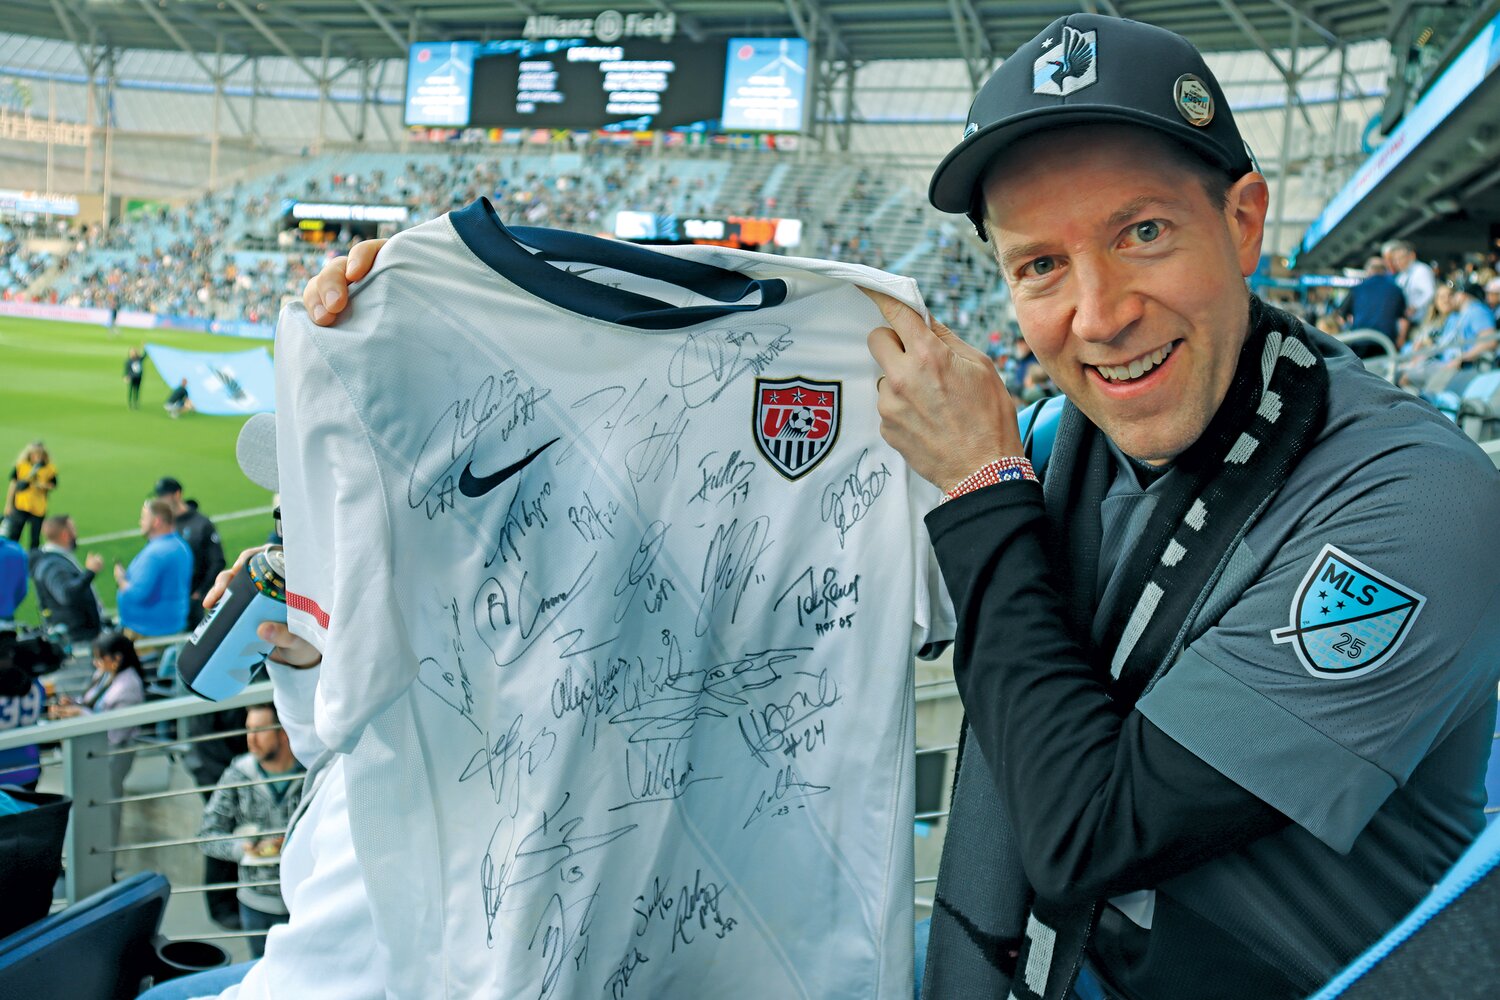 Season ticket holder Jericho Tabor of Minneapolis holds up a jersey with collected signatures from U.S. National team players during a May 2023 Loons game.